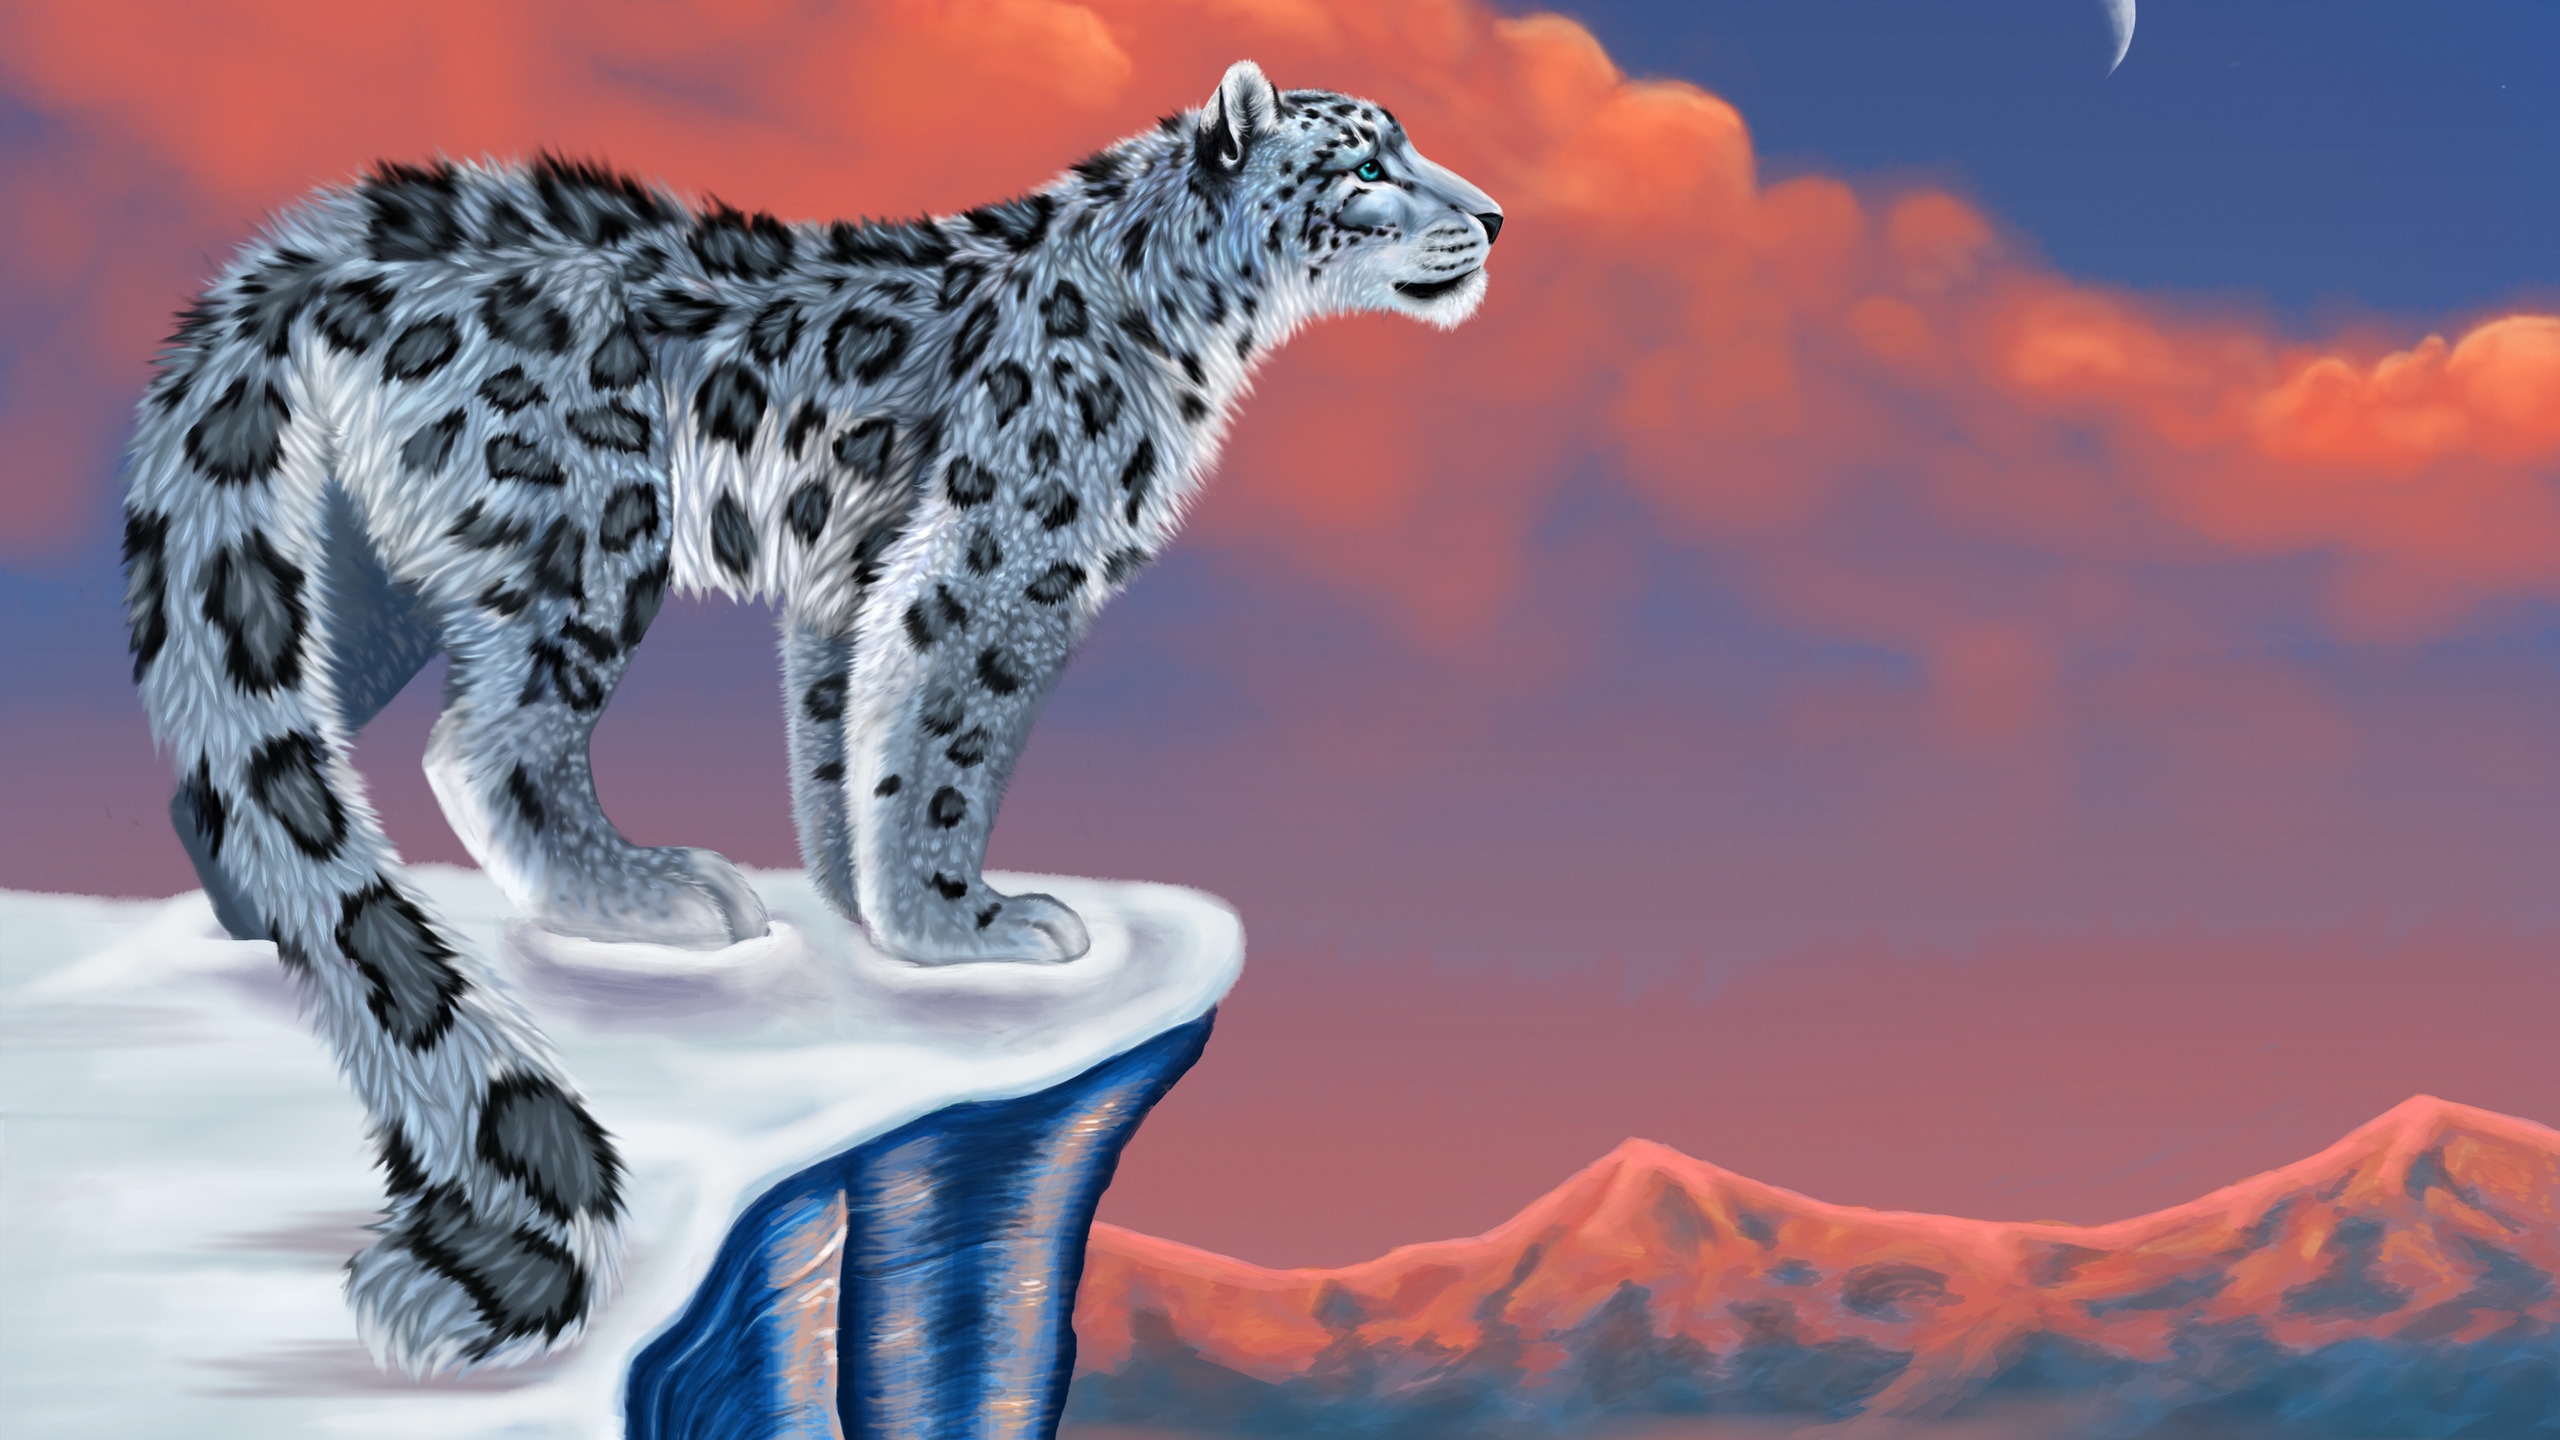 Lonely Leopard for 2560x1440 HDTV resolution